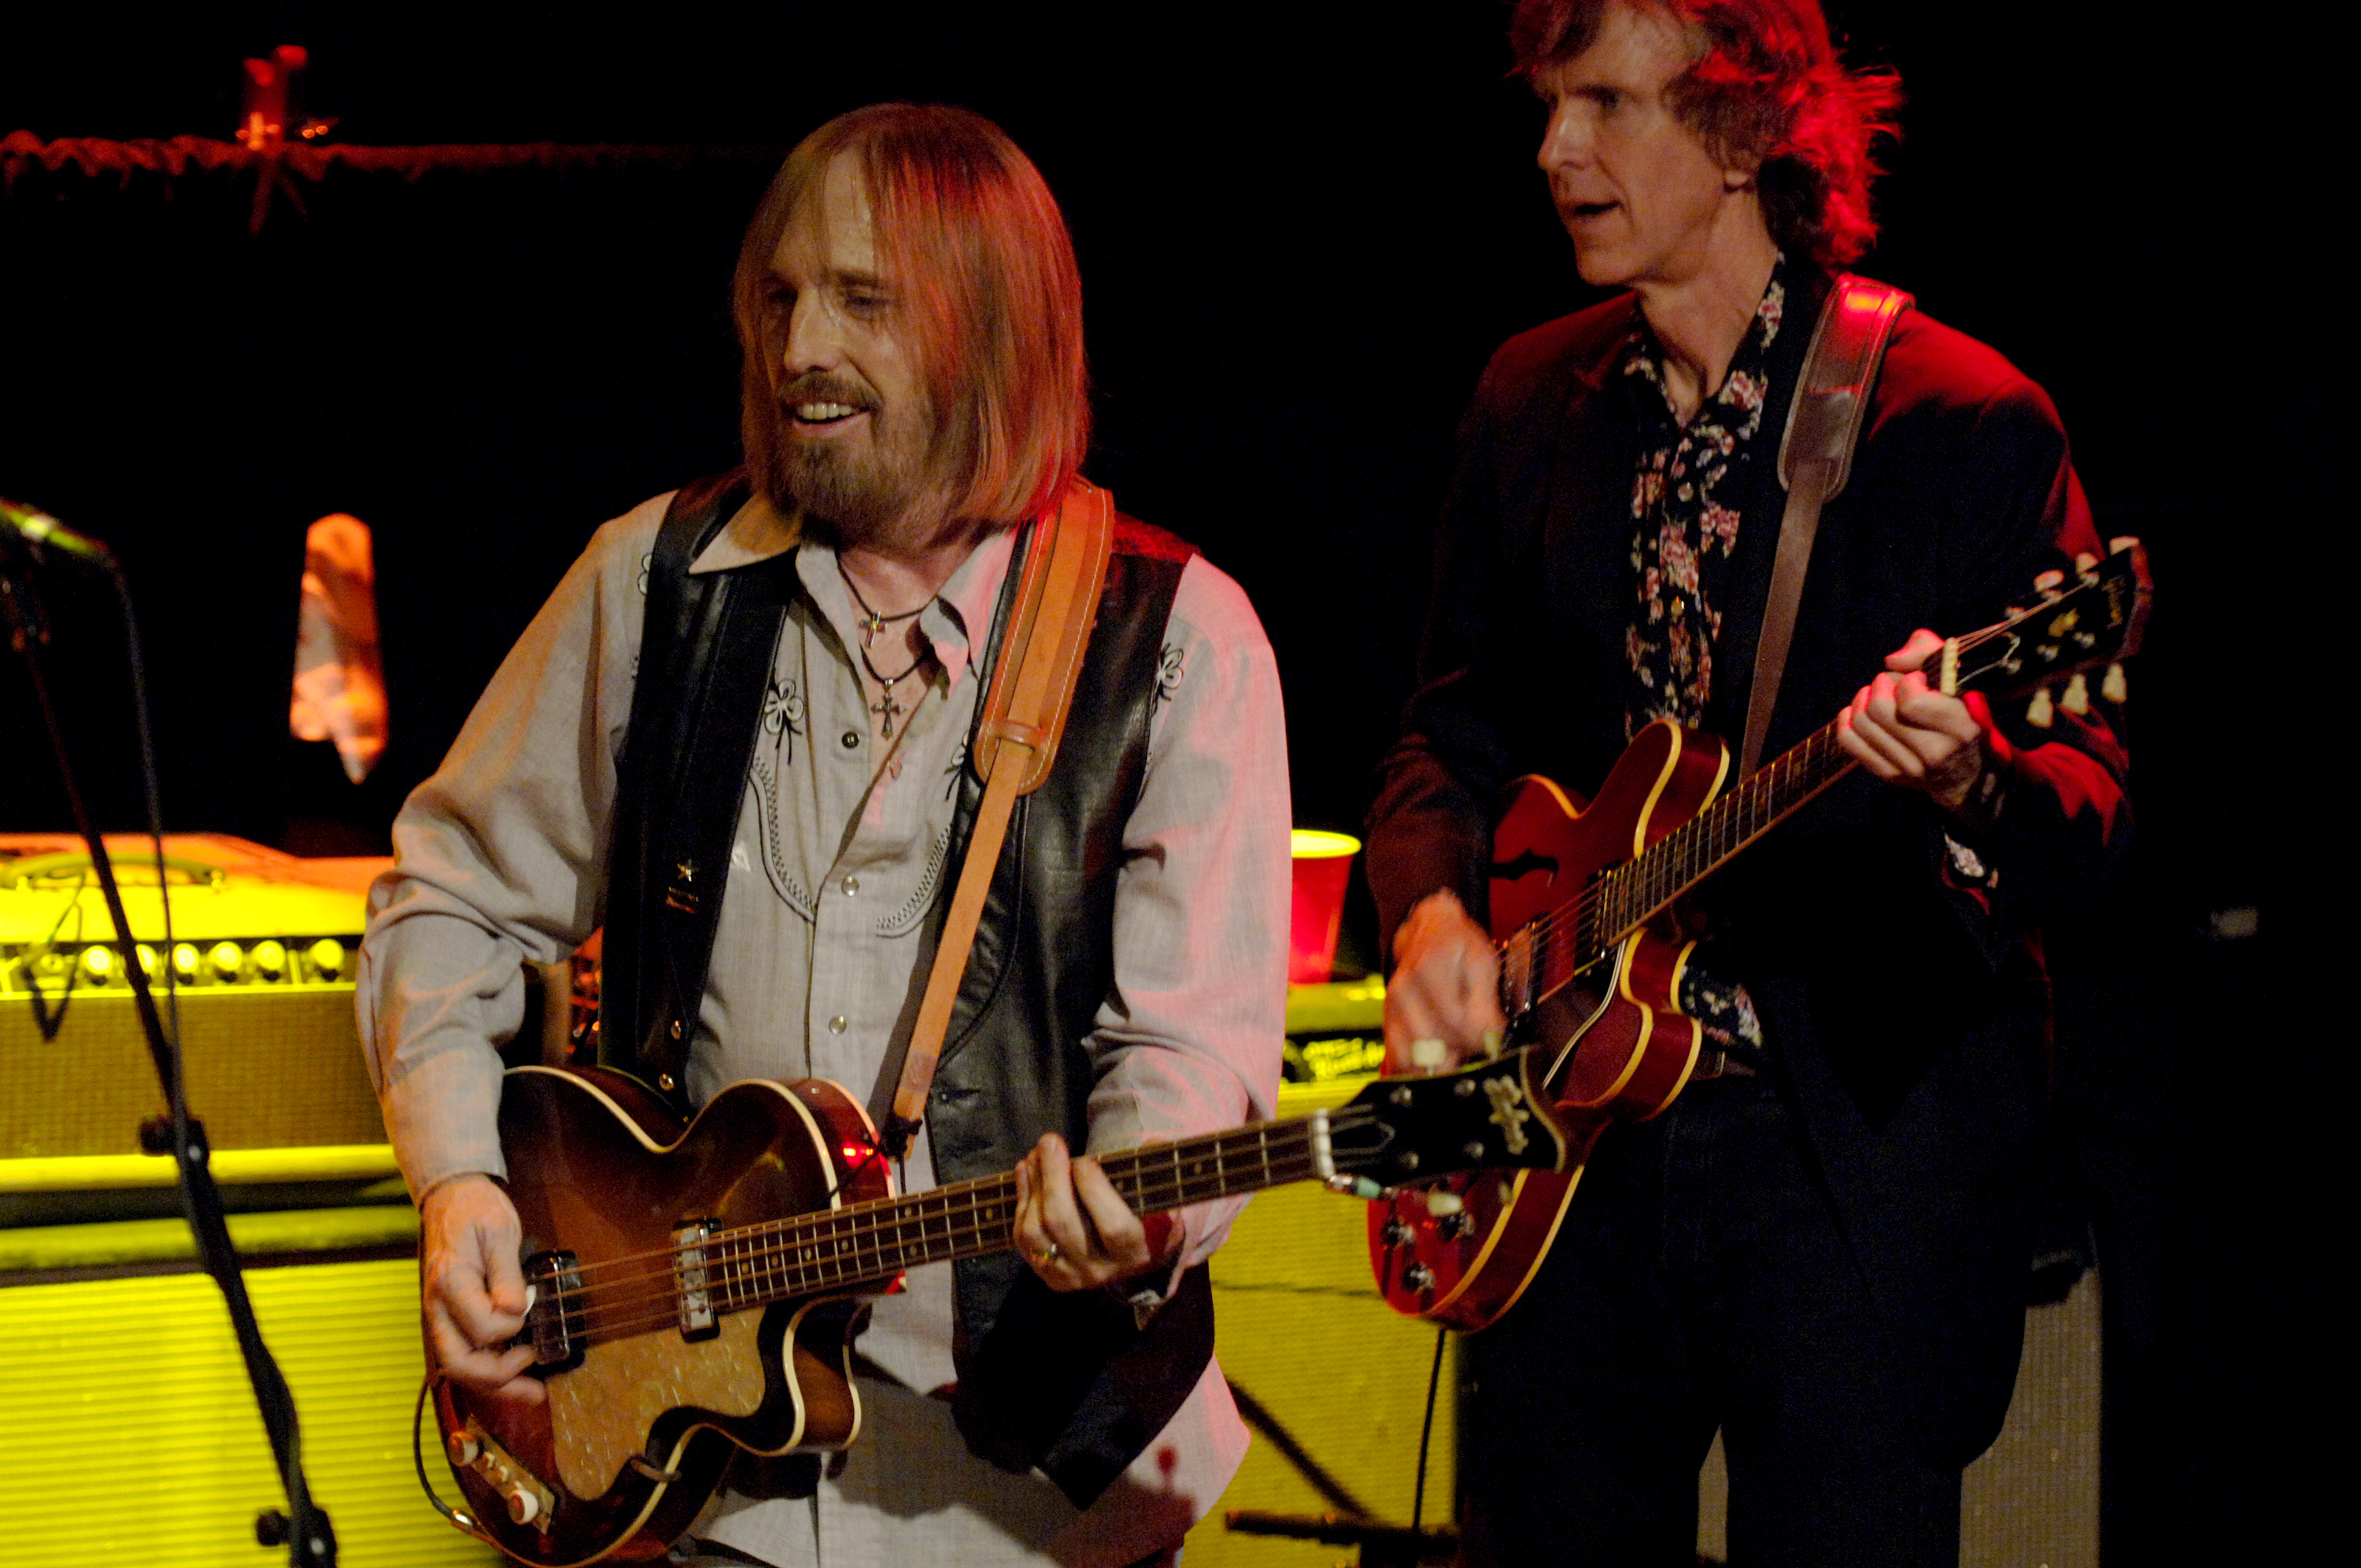 Tom Petty and his friend Tom Leadon play guitar together on stage.